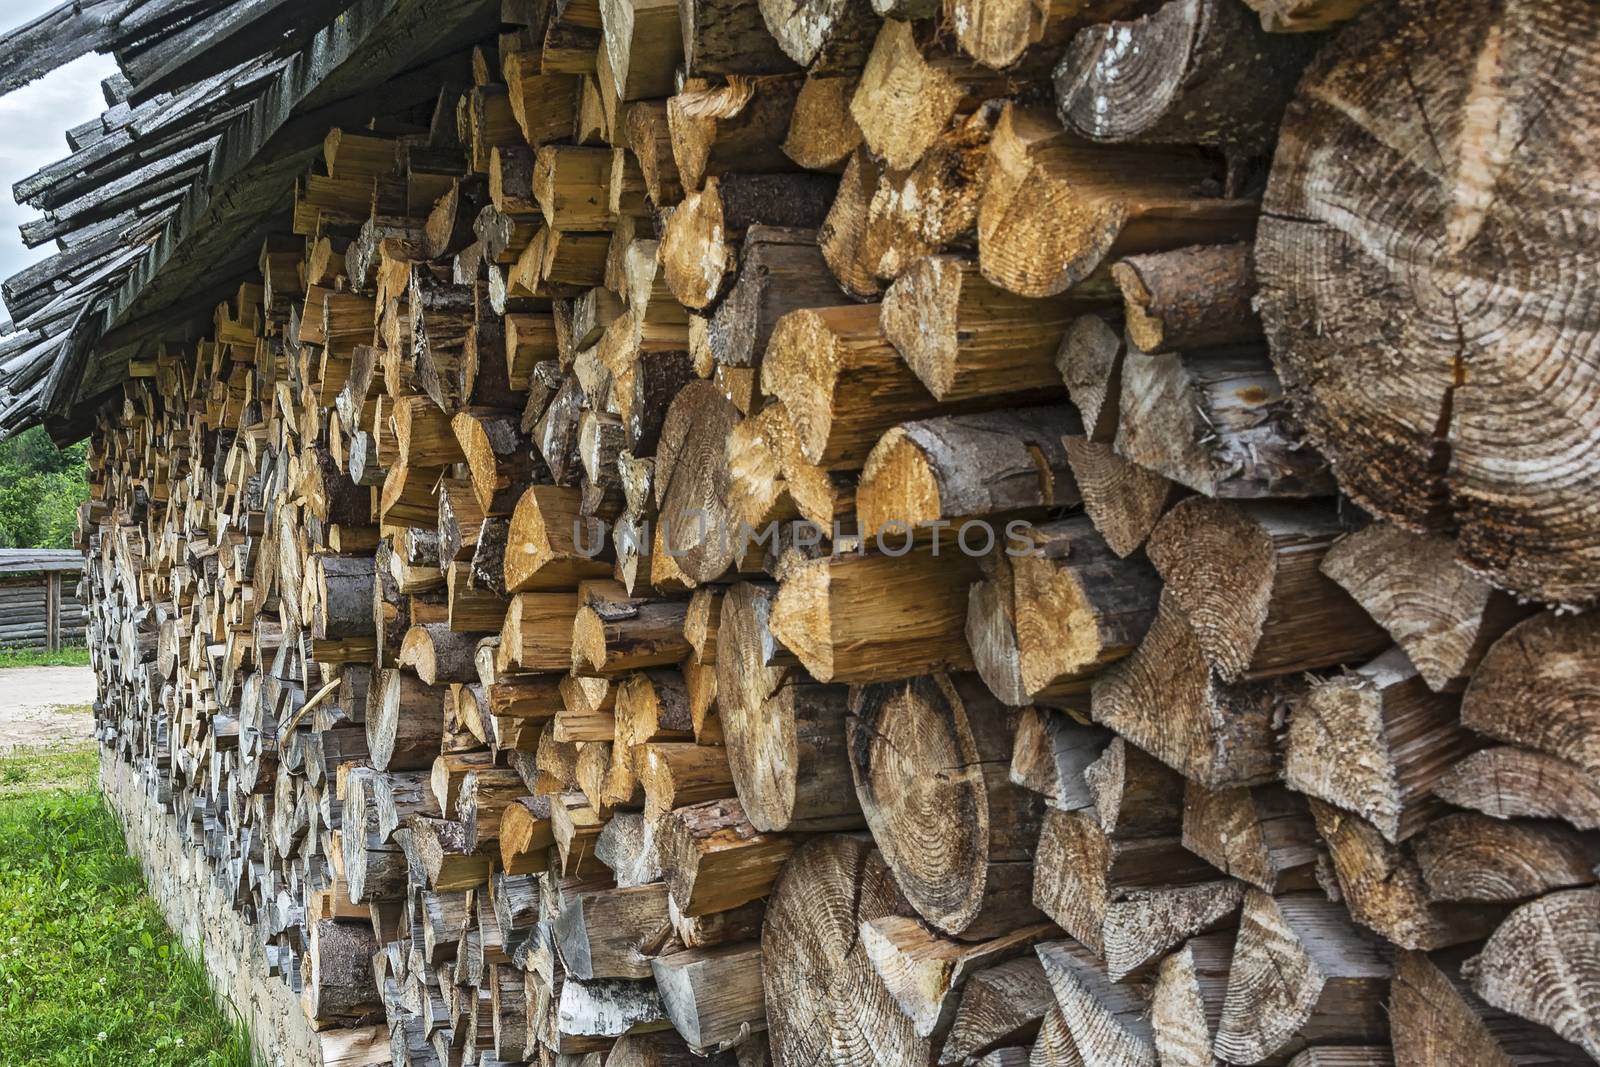 Under a canopy, firewood is placed in the woodpile for the winter season